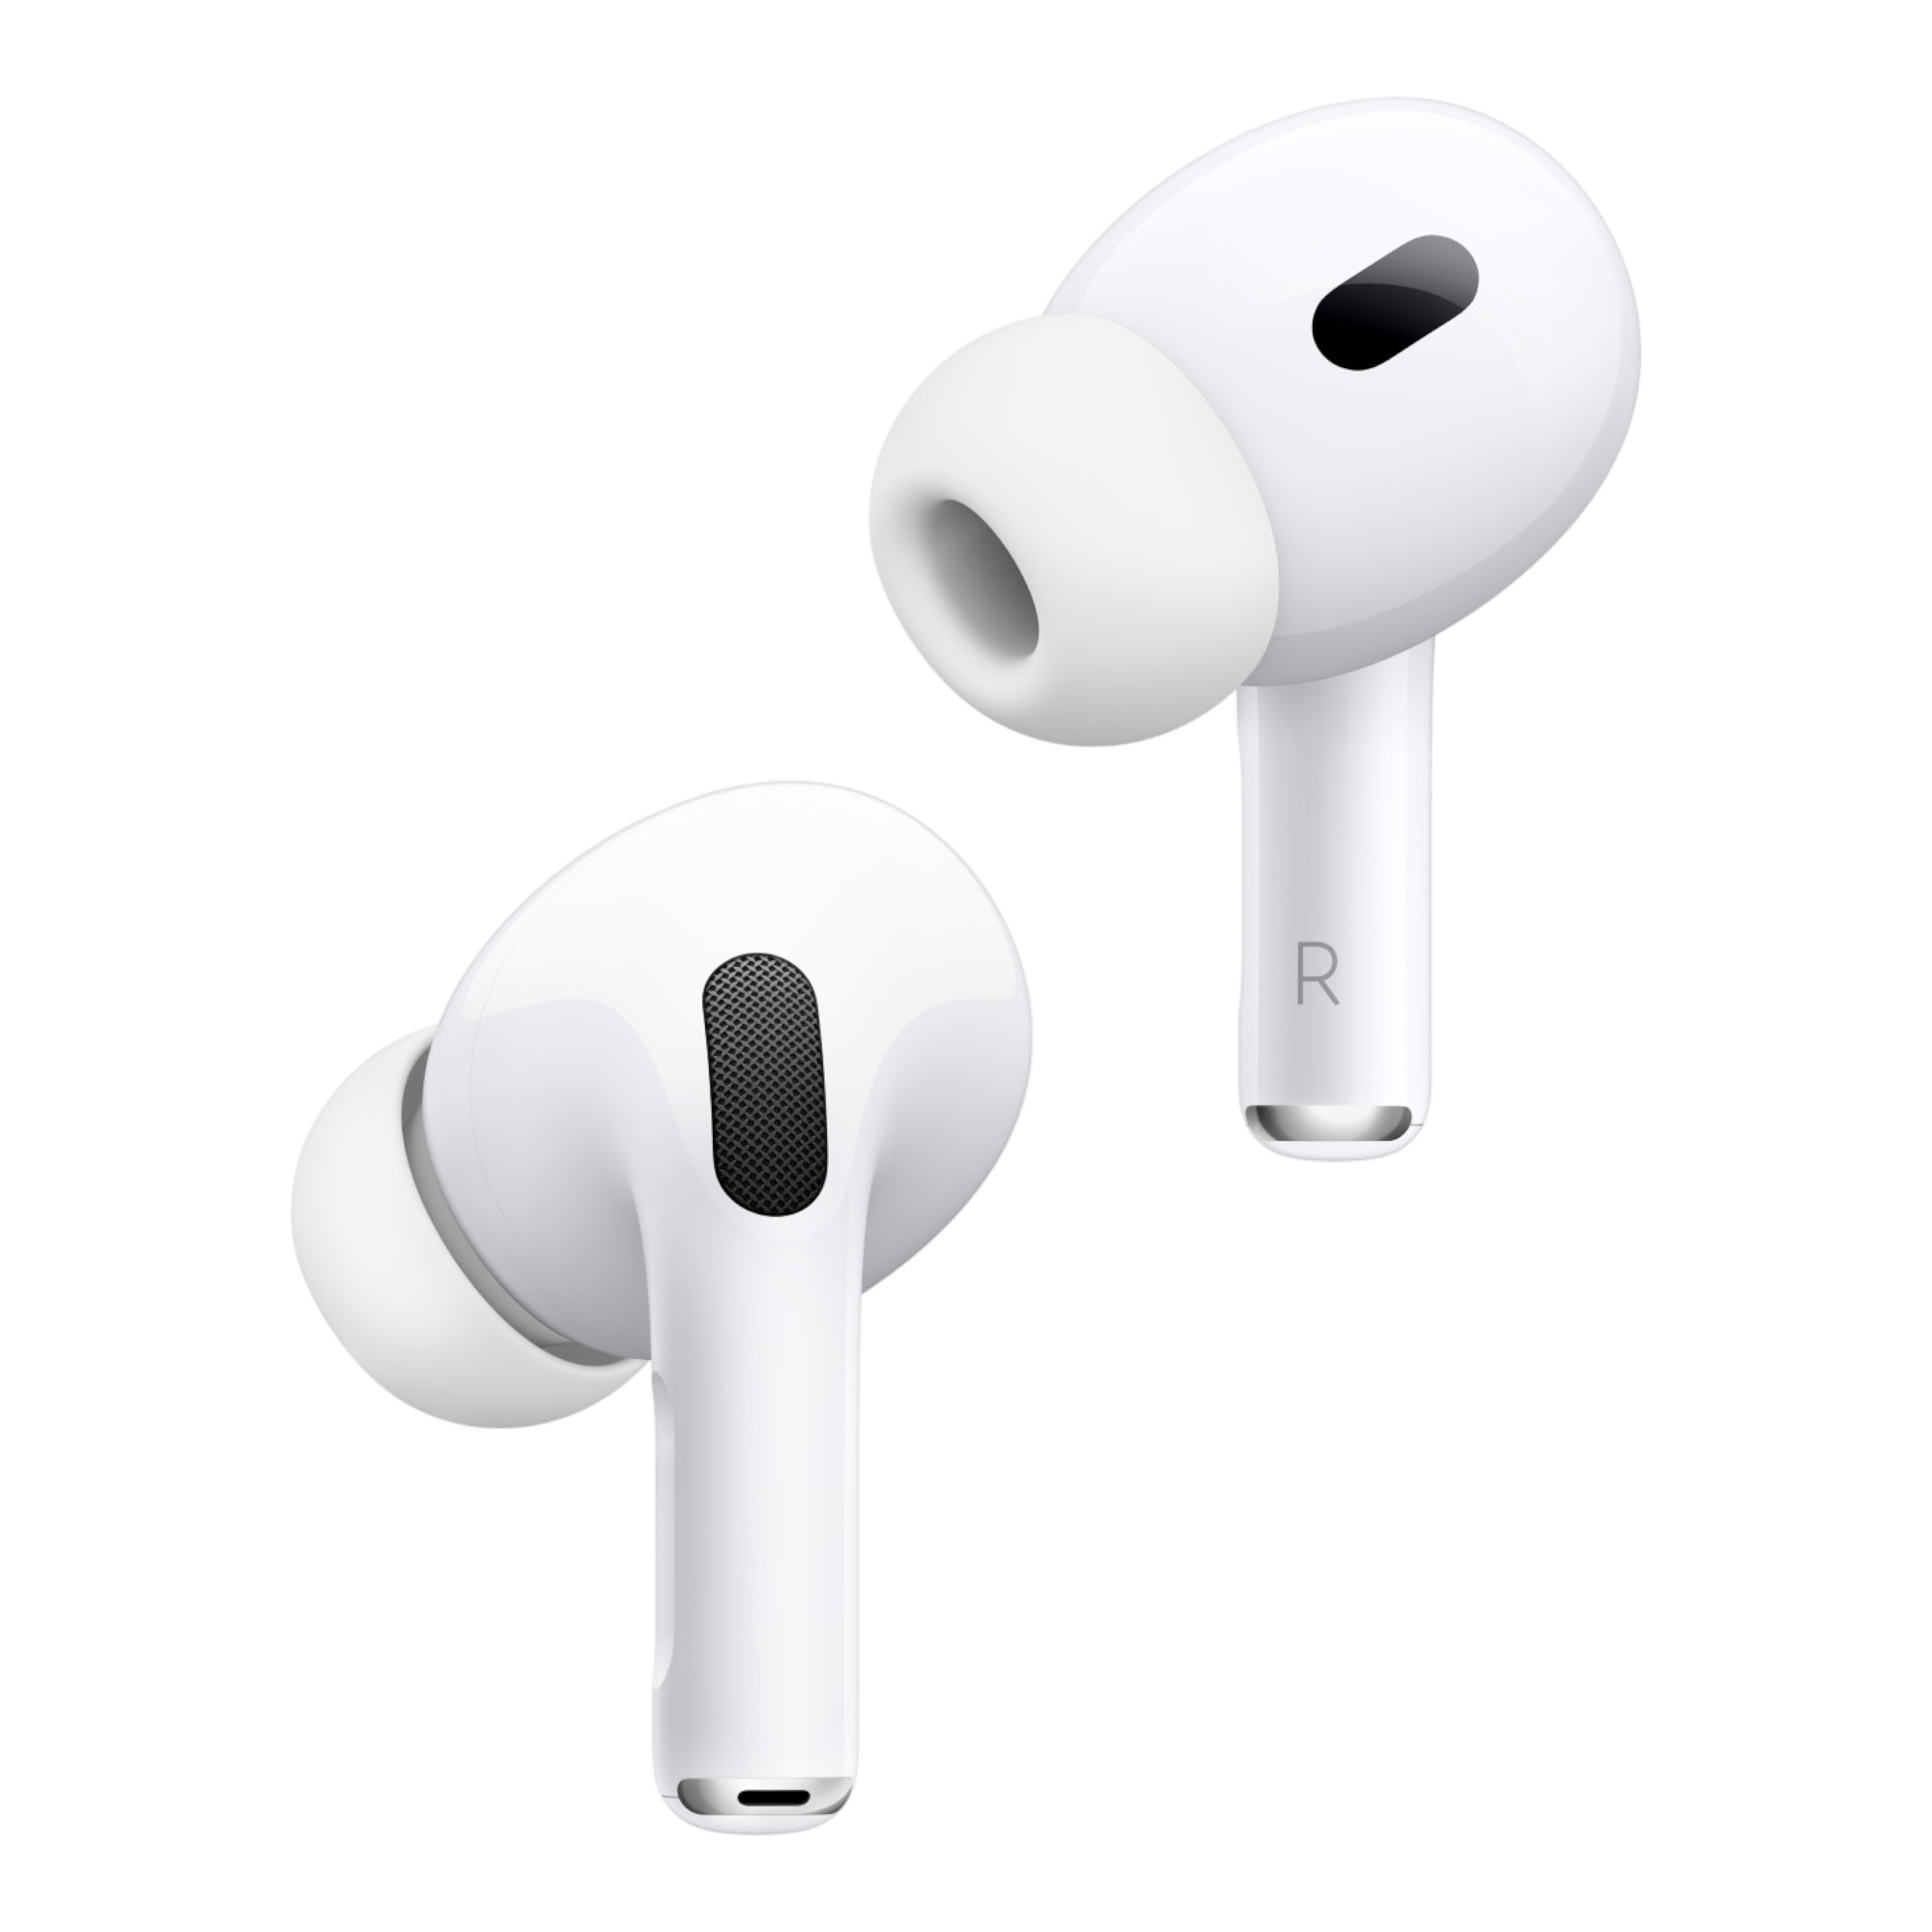 A pair of white AirPods Pro (2nd generation) with Active Noise Cancellation for improved sound quality.